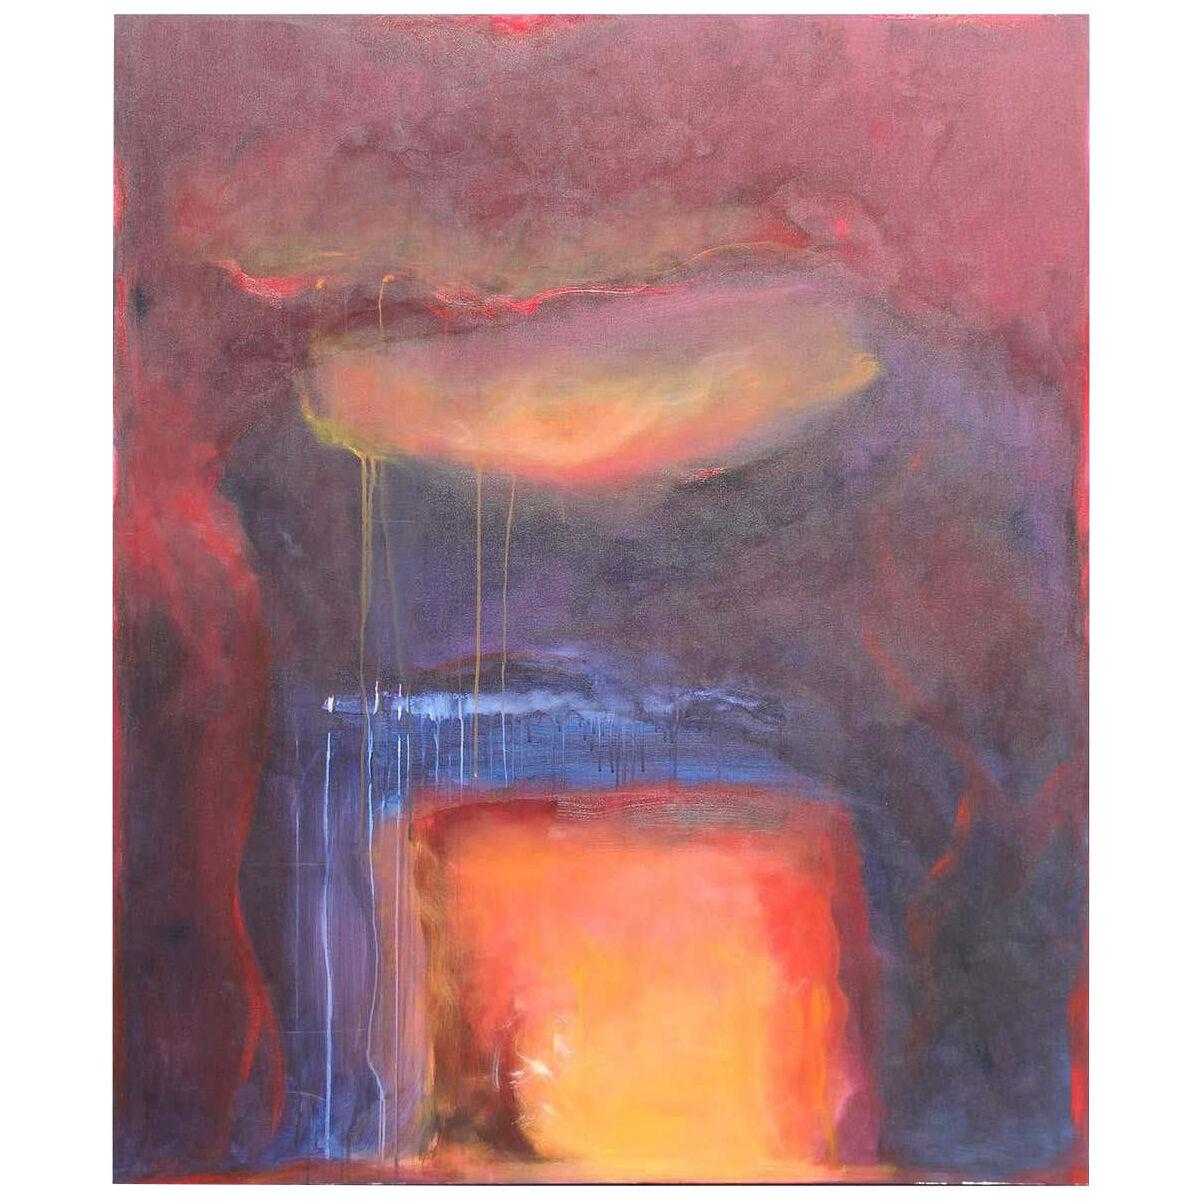 Karen Lastre “Sounding V” Large Abstract Expressionist Painting 2007